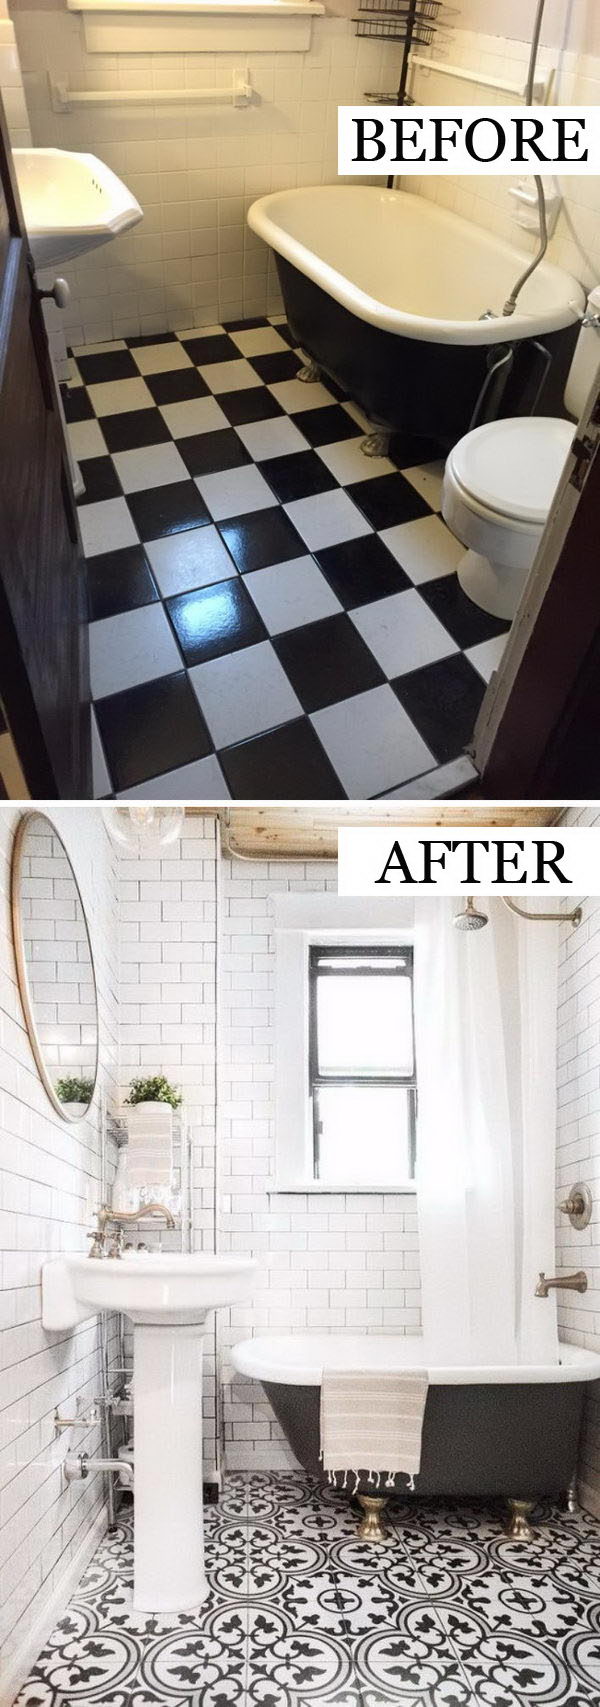 Keeping The Walls White Prevents The Black and White Retro Floor Tile from Feeling Busy. 